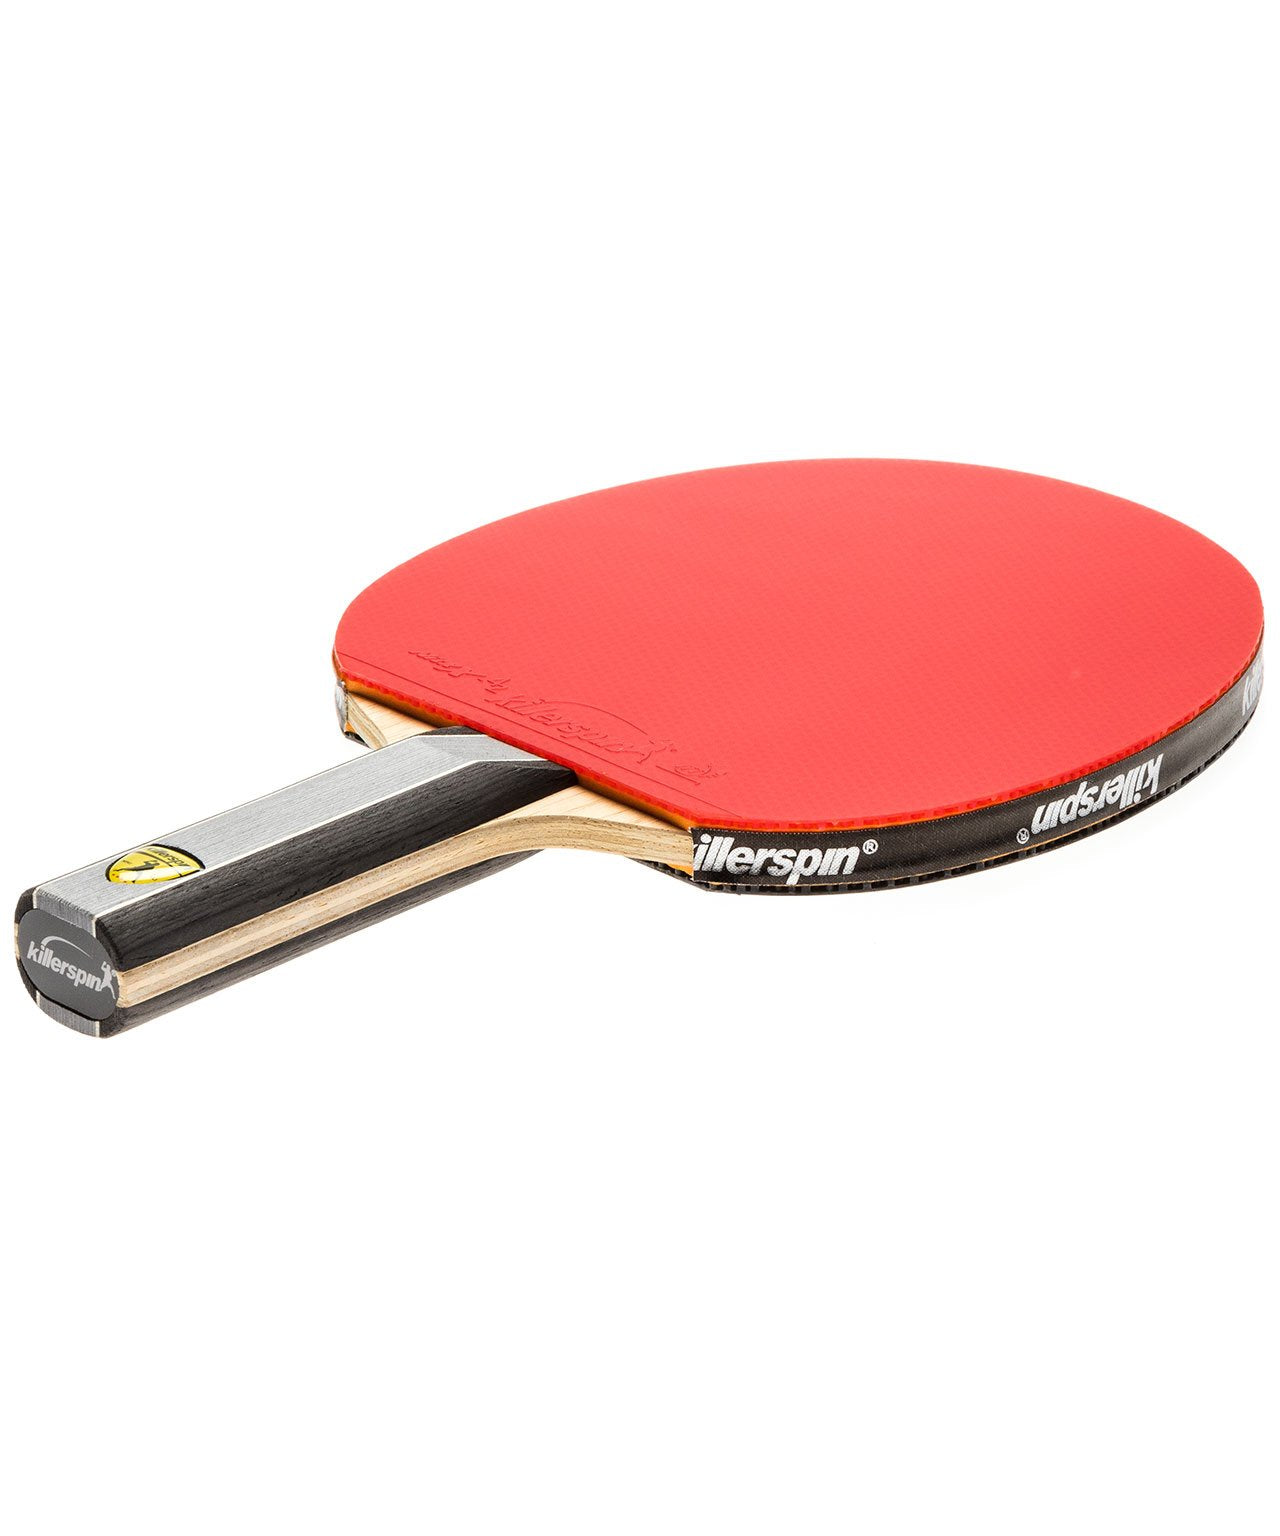 Killerspin Ping Pong Paddle Kido 7P RTG - Straight Red Rubber